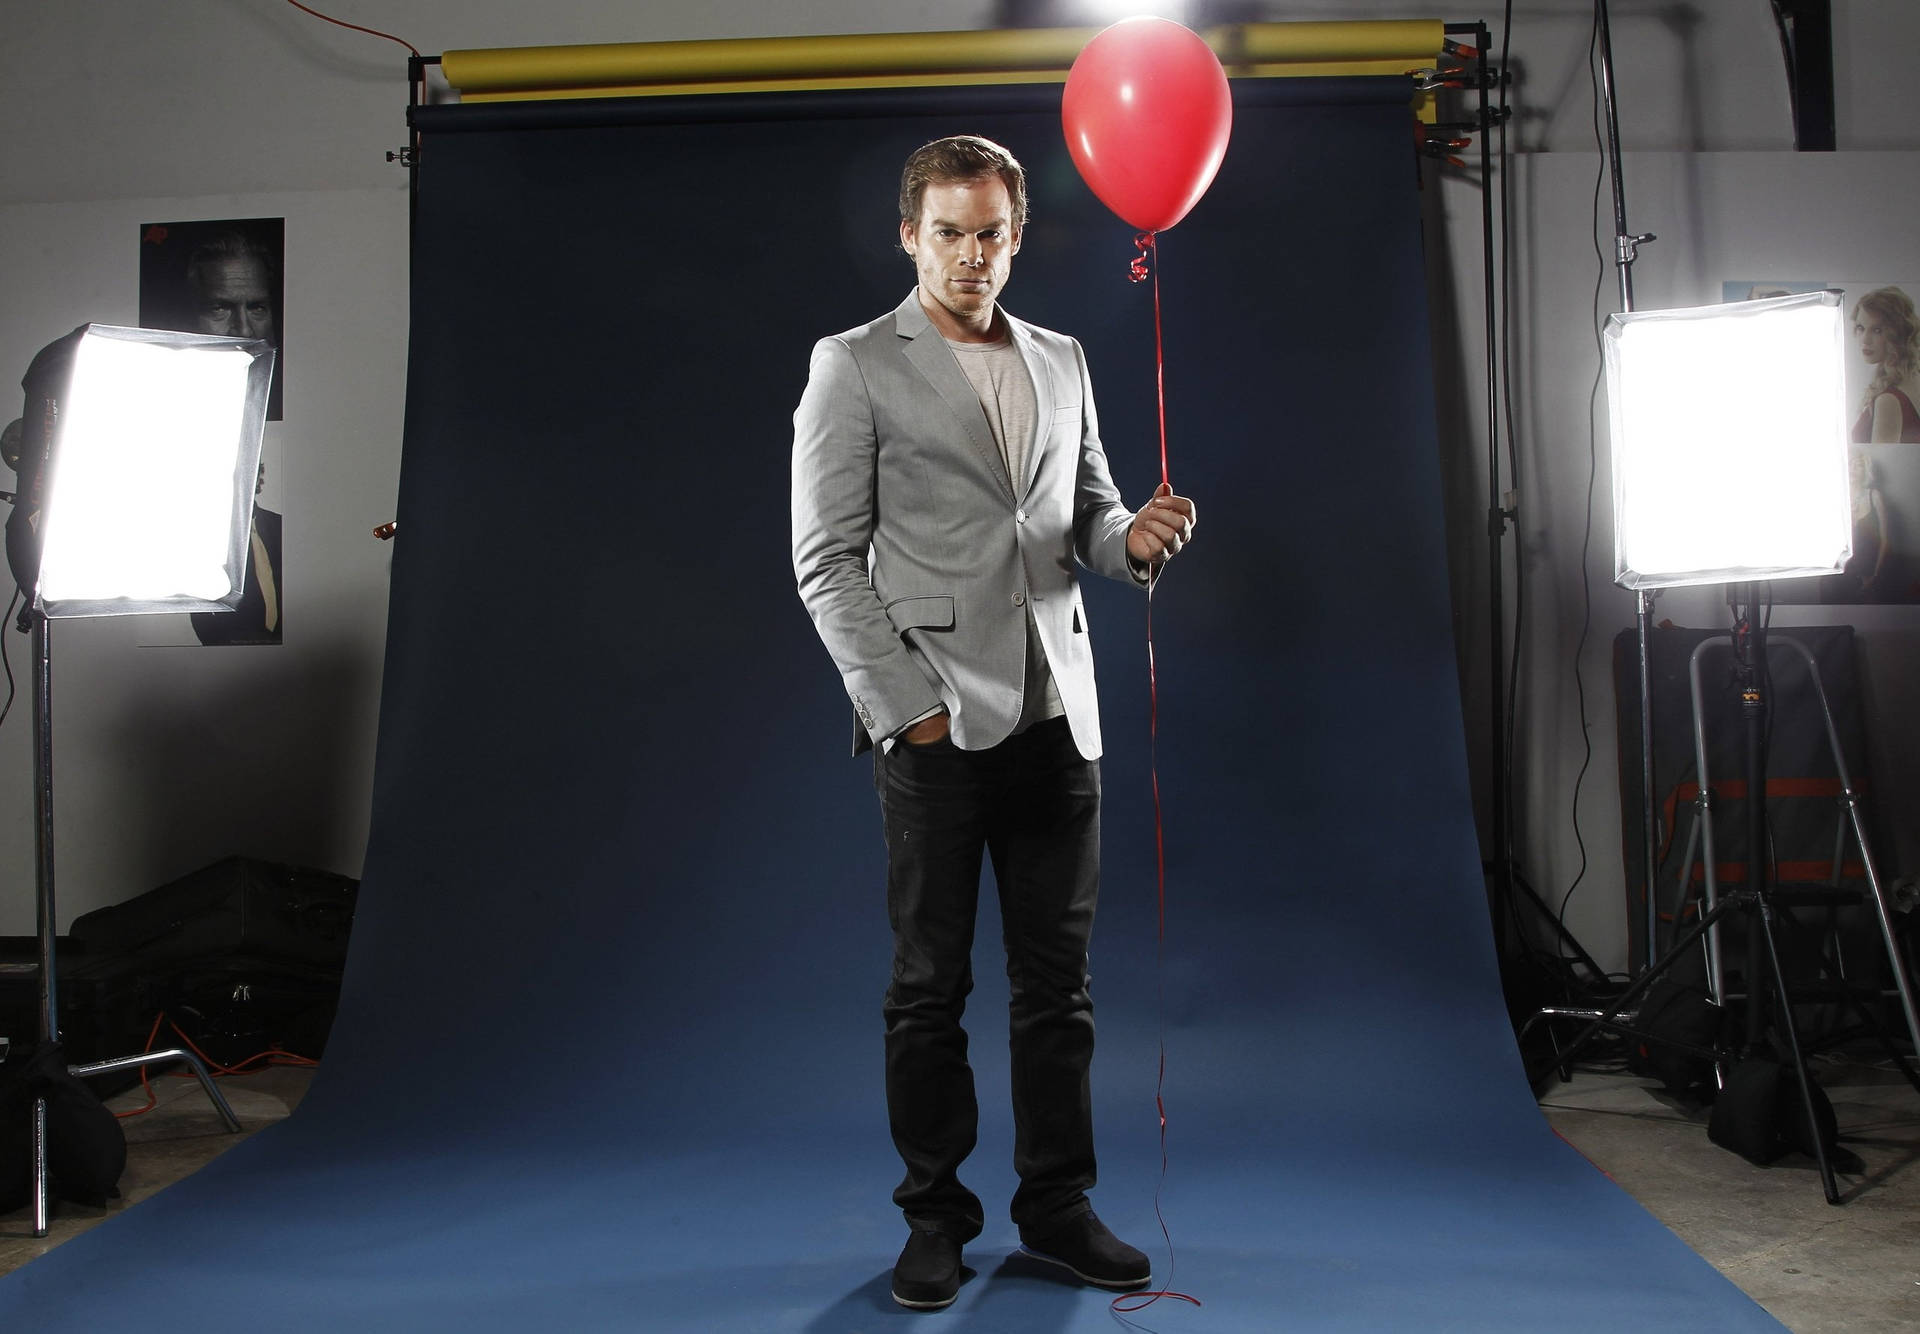 Red Balloon In Photography Studio Background